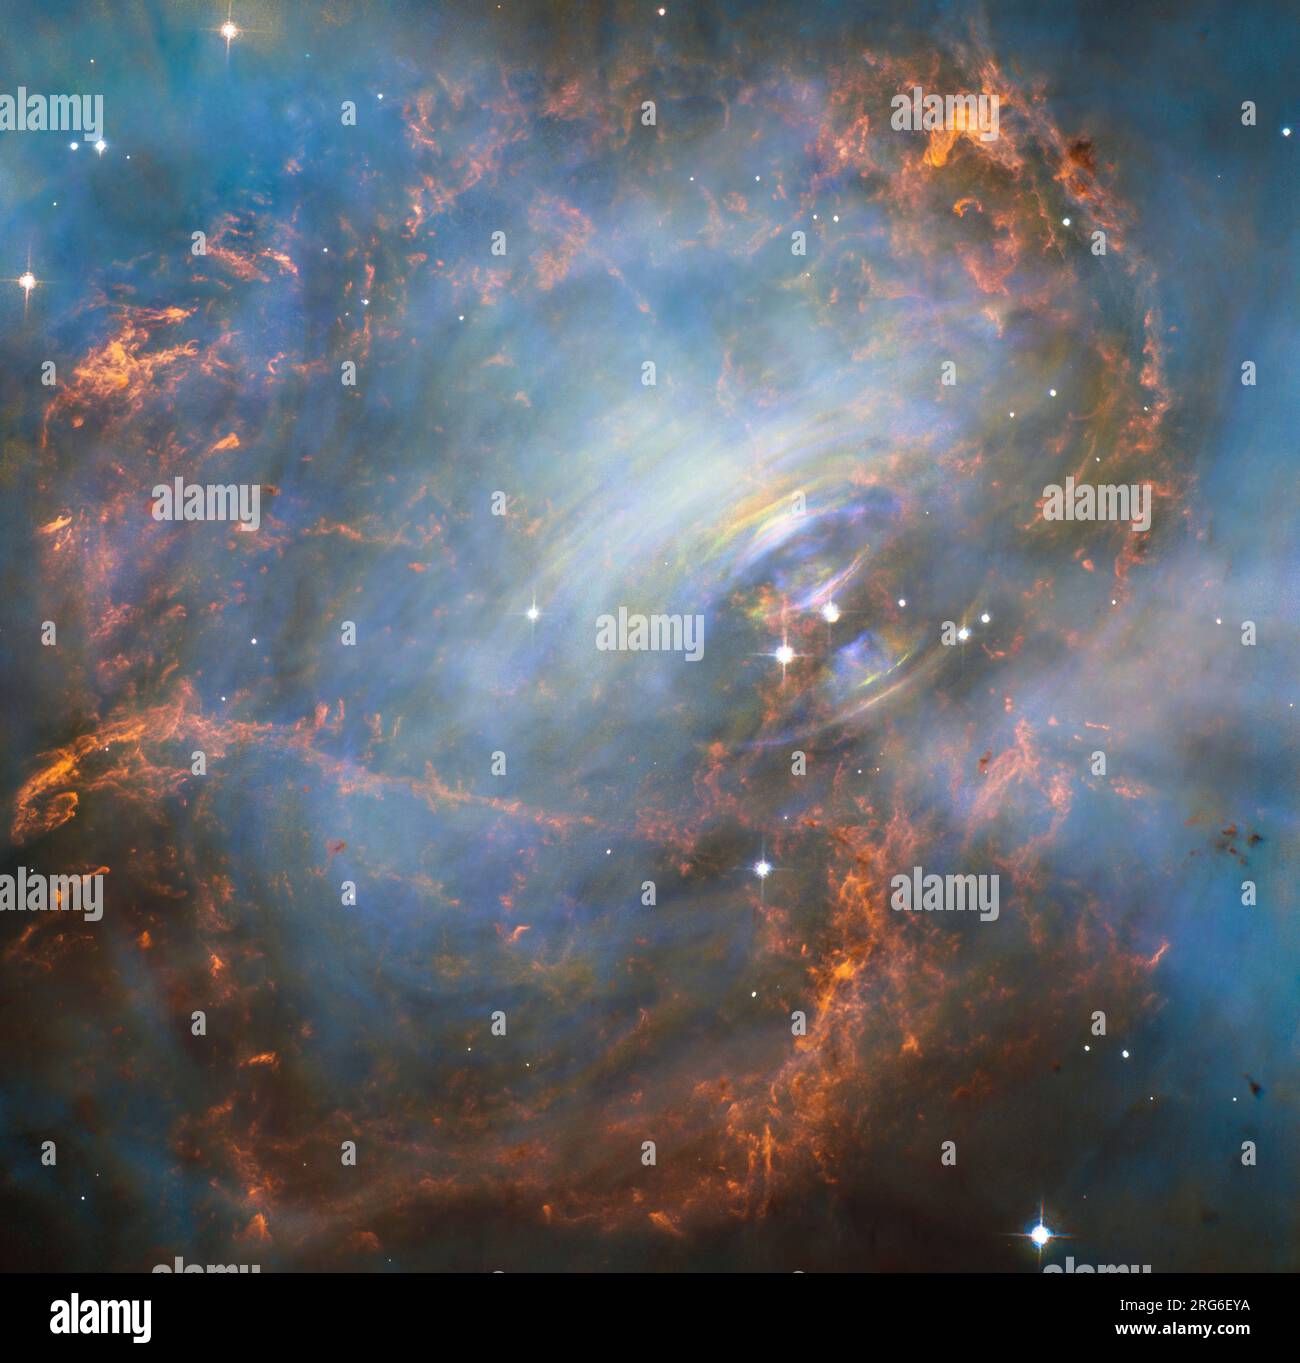 Central neutron star at the heart of the Crab Nebula. Stock Photo